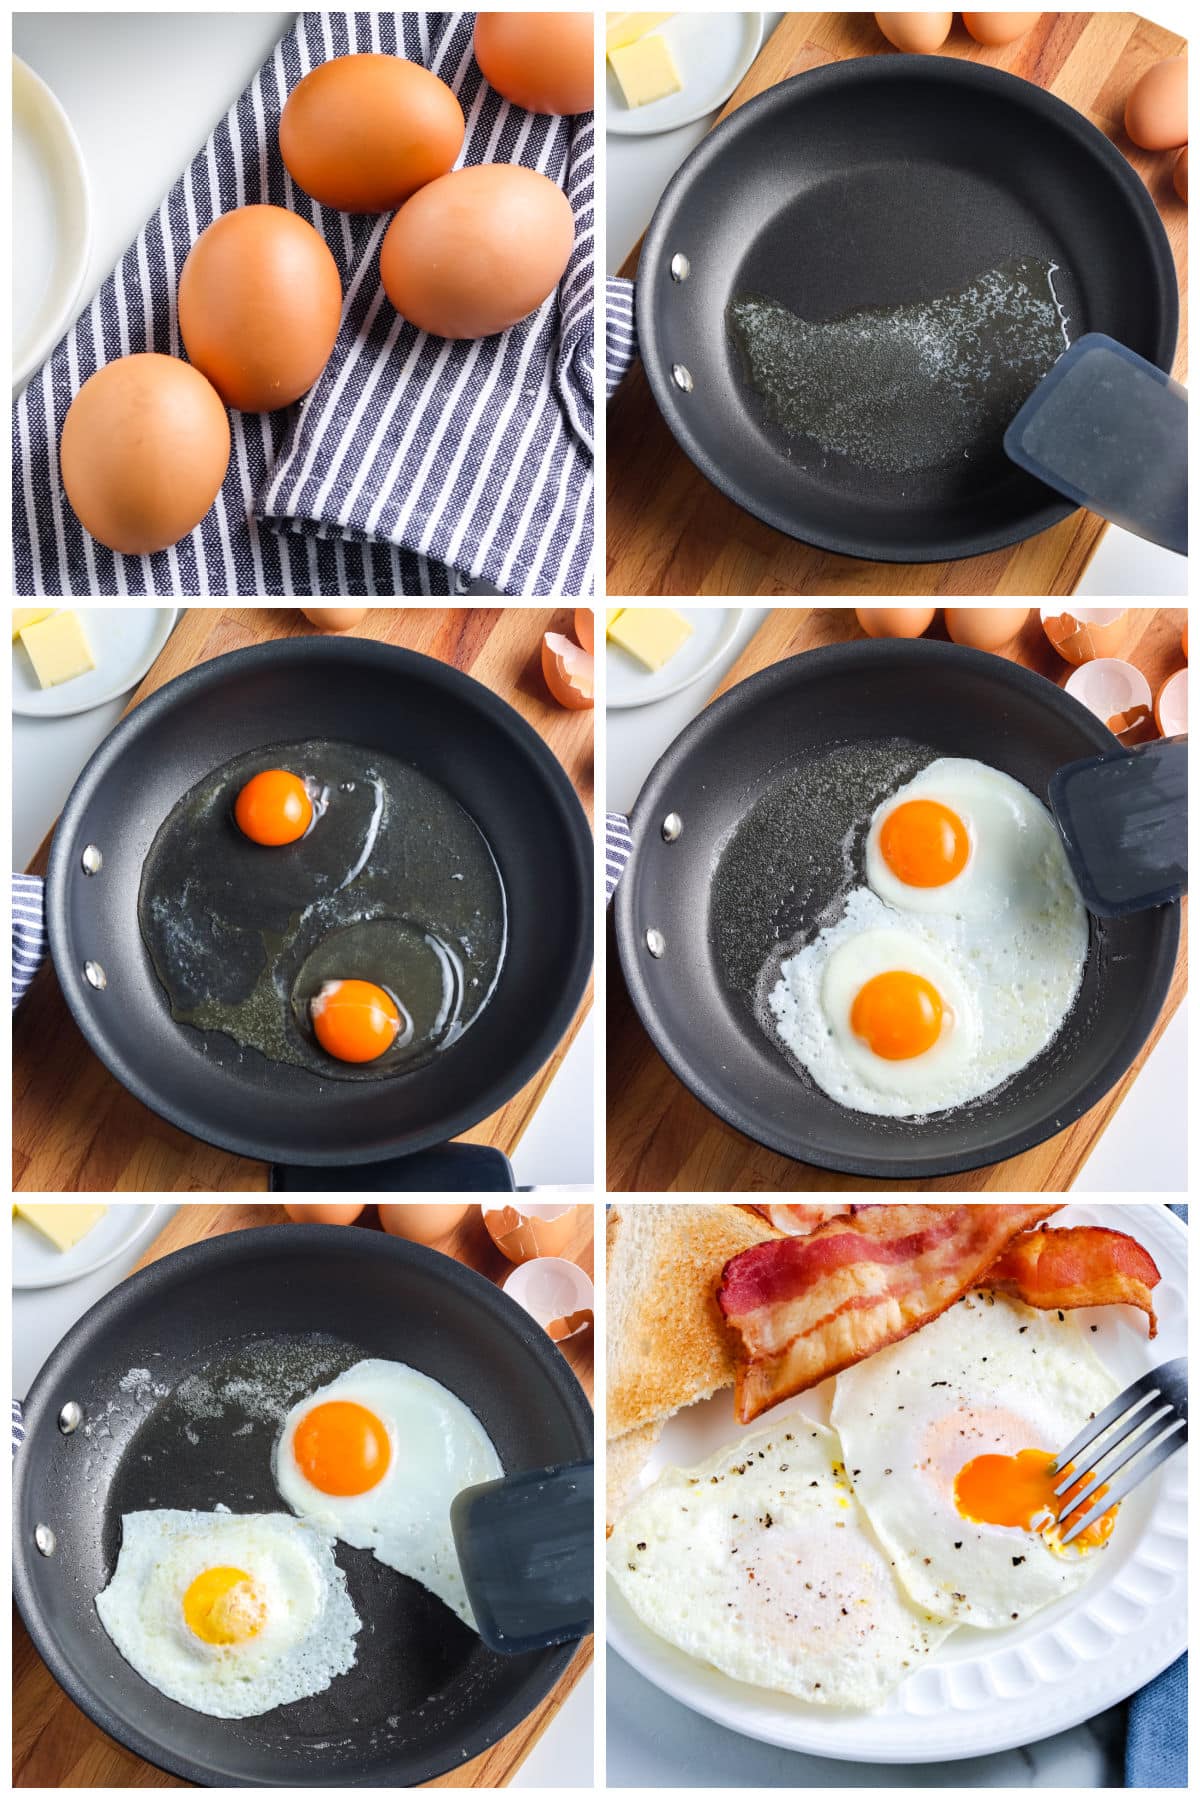 A picture collage showing How To Make Eggs Over Easy.